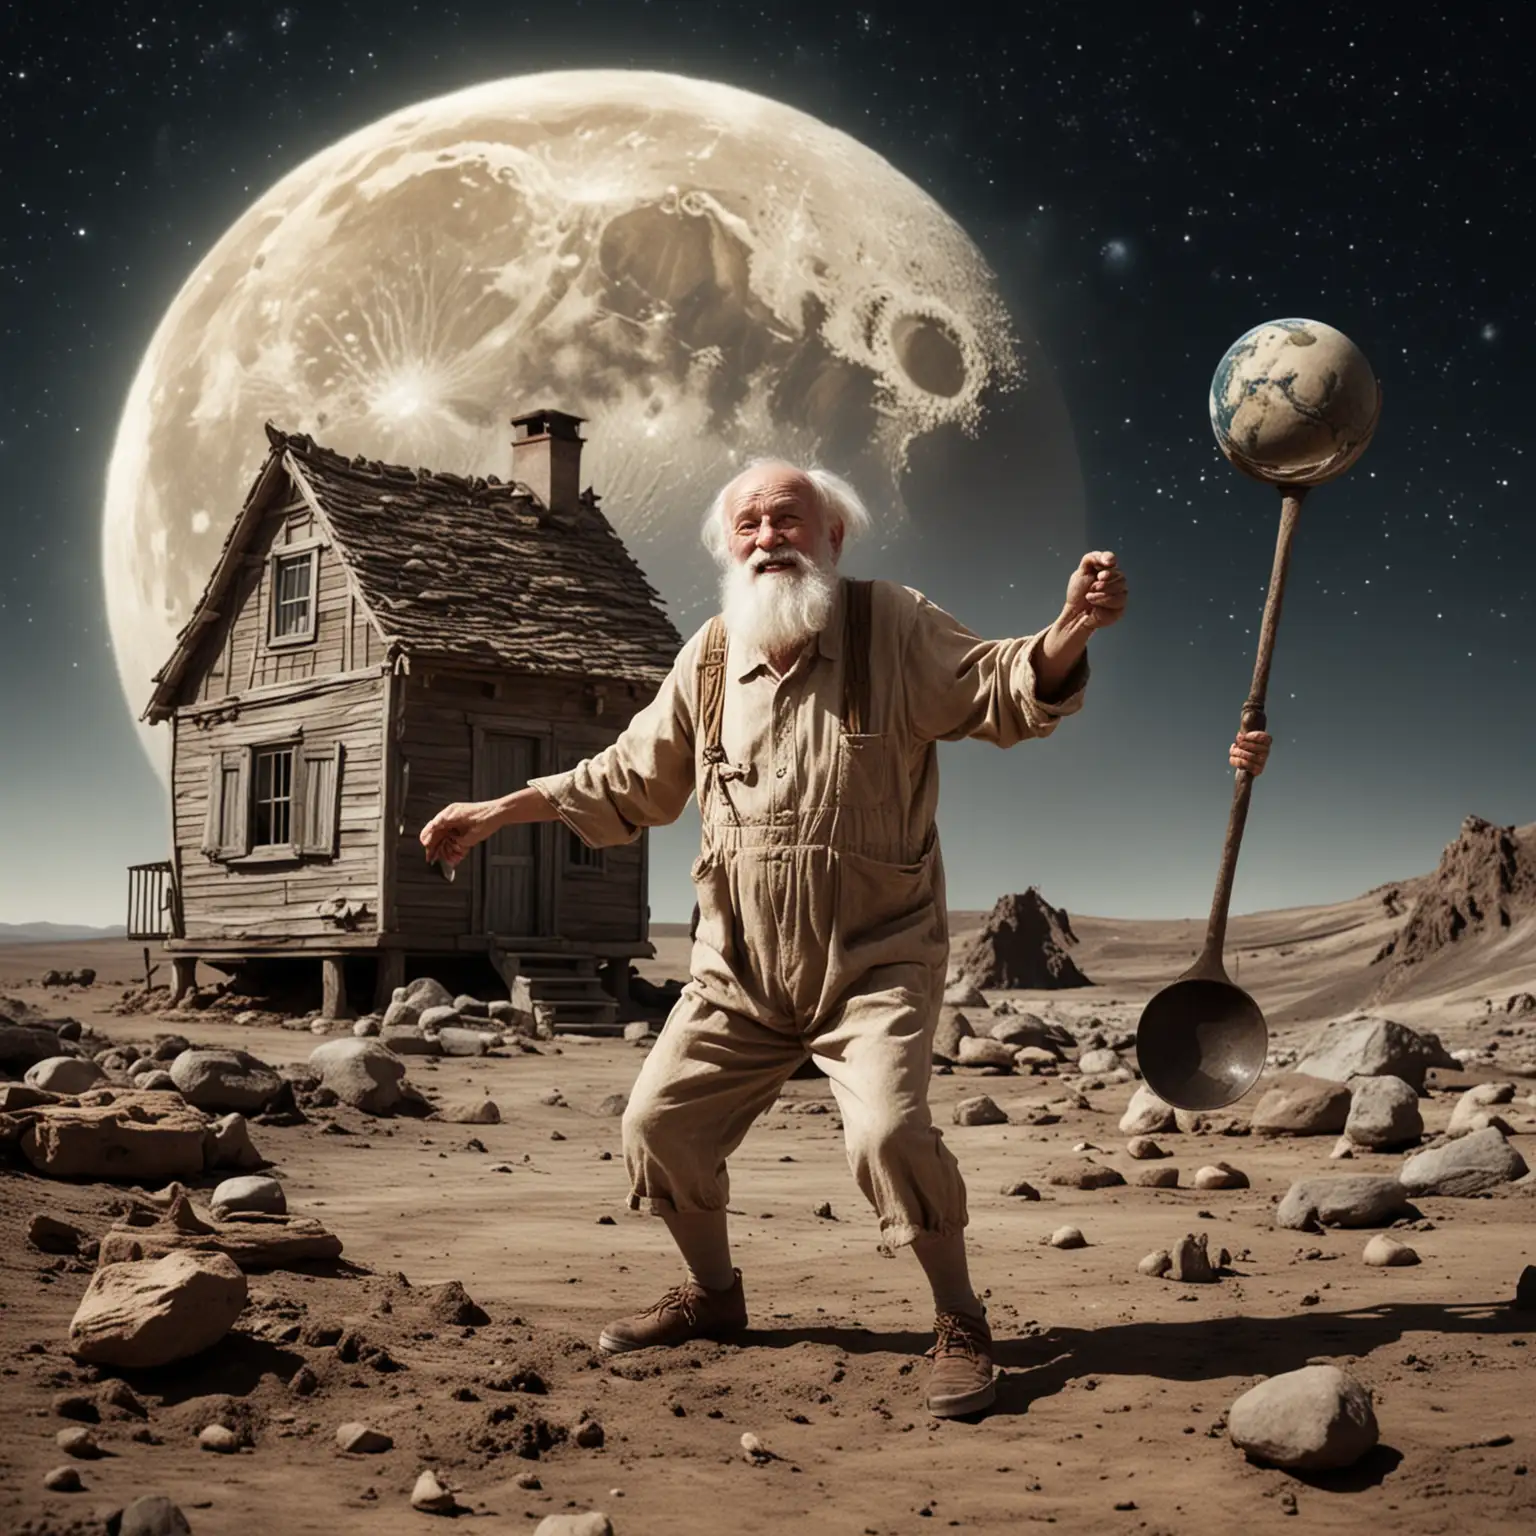 Elderly Man Dancing with Ladle in Hand on Moon Overlooking Earth